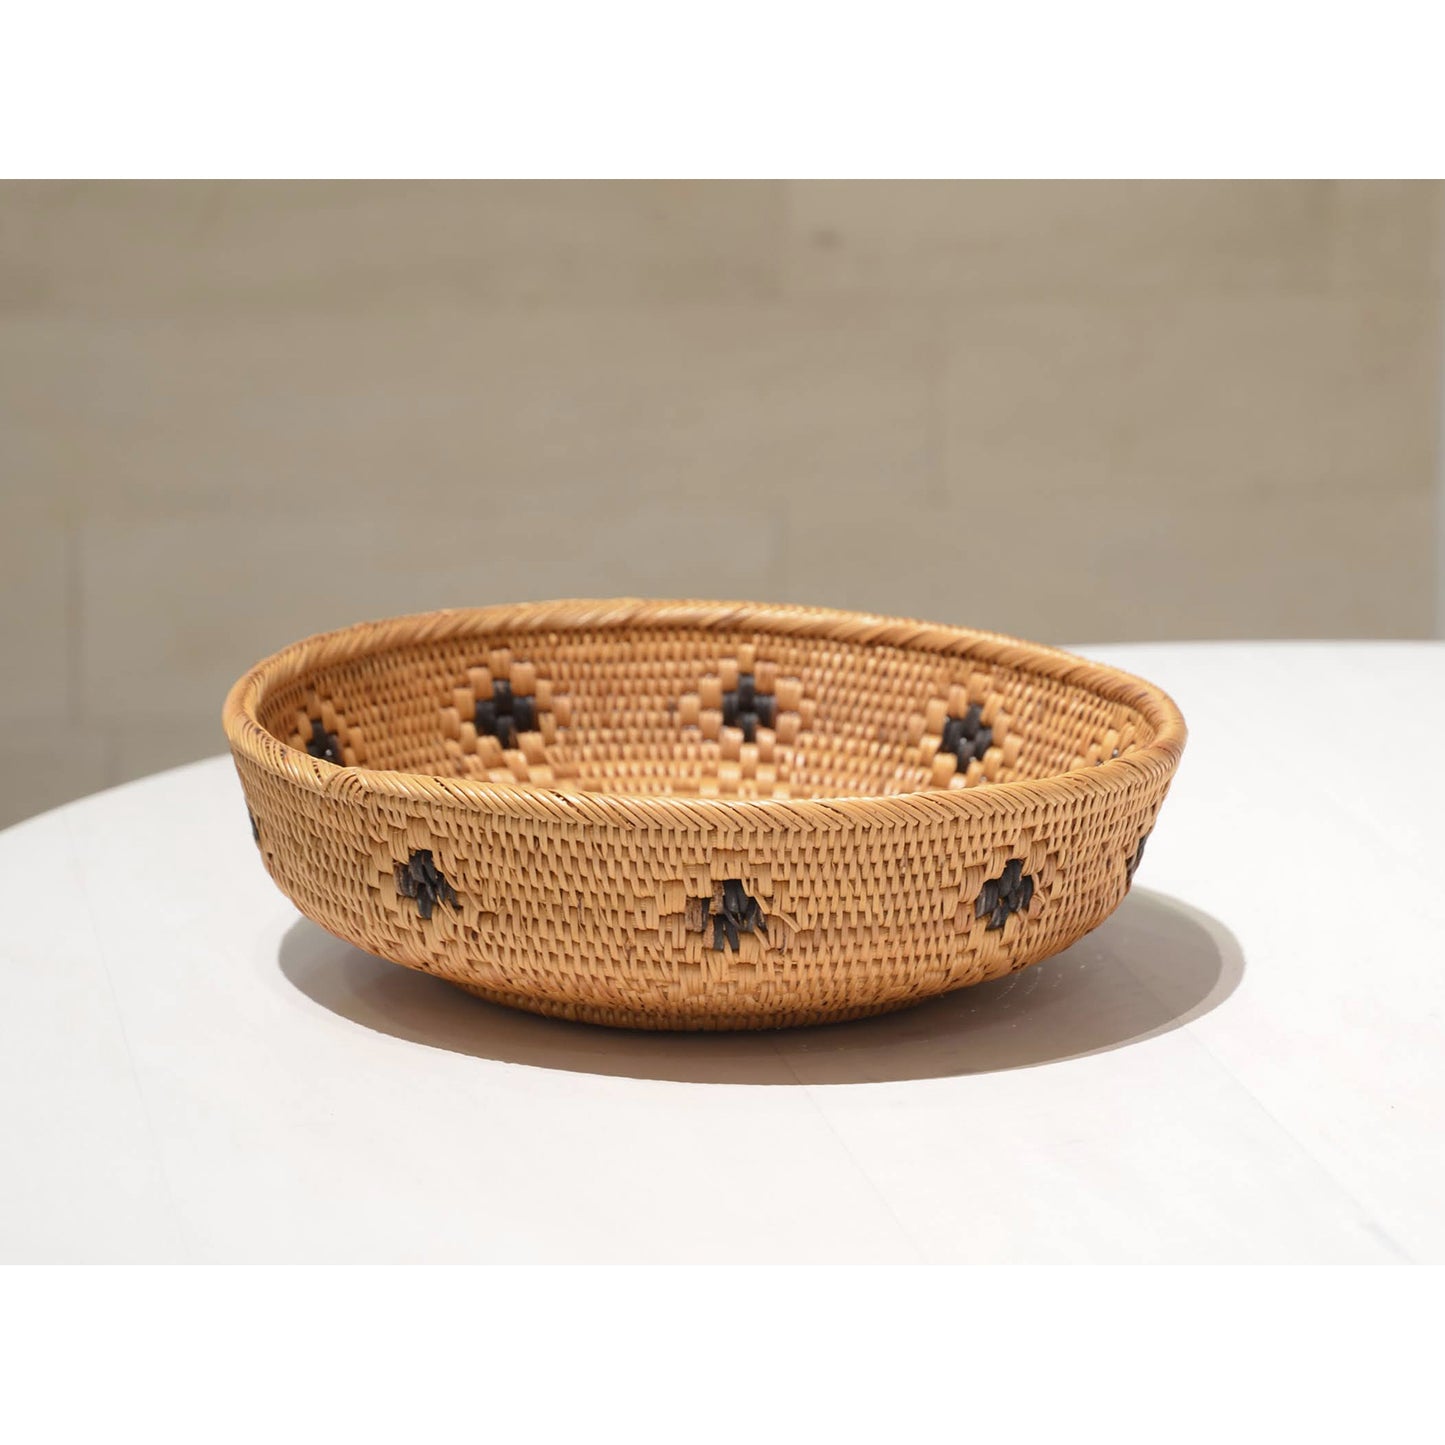 Woven Ata Reed Bowl - Round with Black Detailing